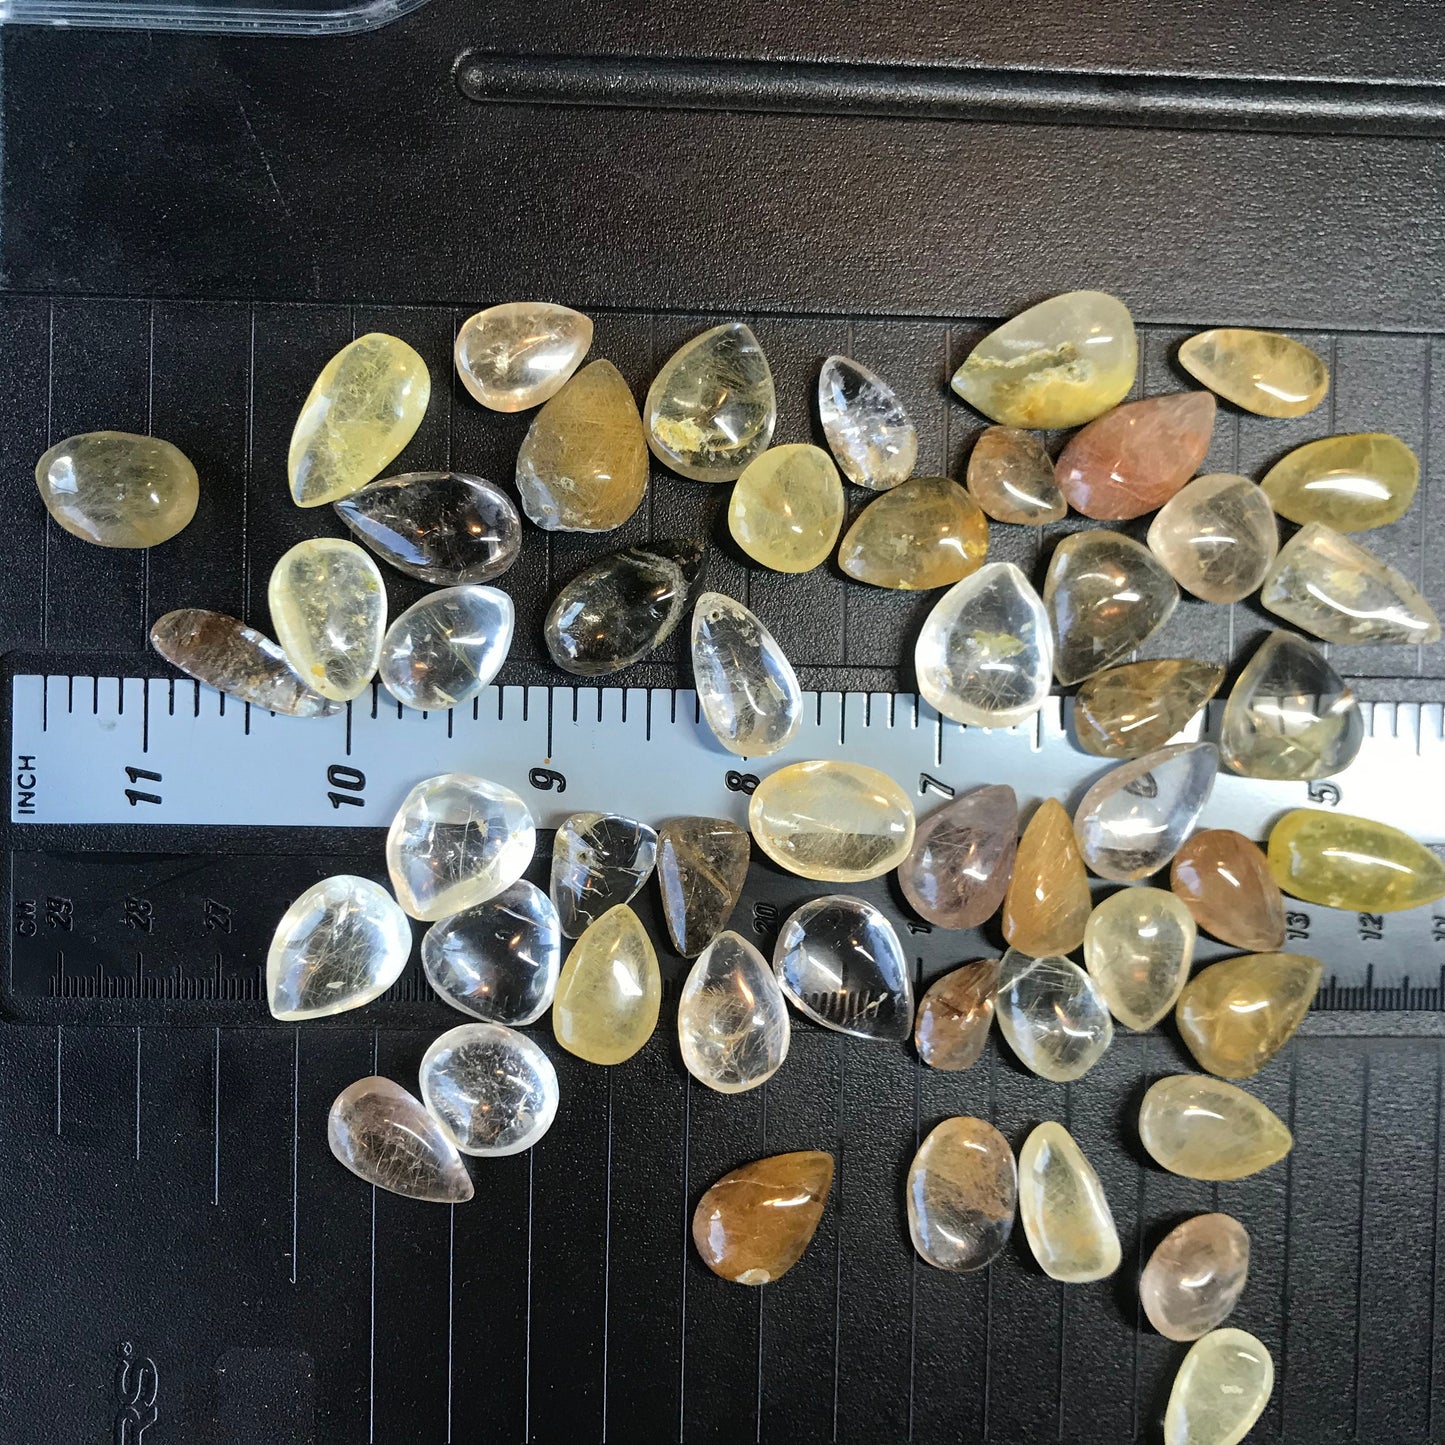 Golden Rutilated Quartz, Tumbled, Polished Rutile Quartz, One Stone (between 3/5"-1" long) for Wire Wrapping or Crystal Grid 0640